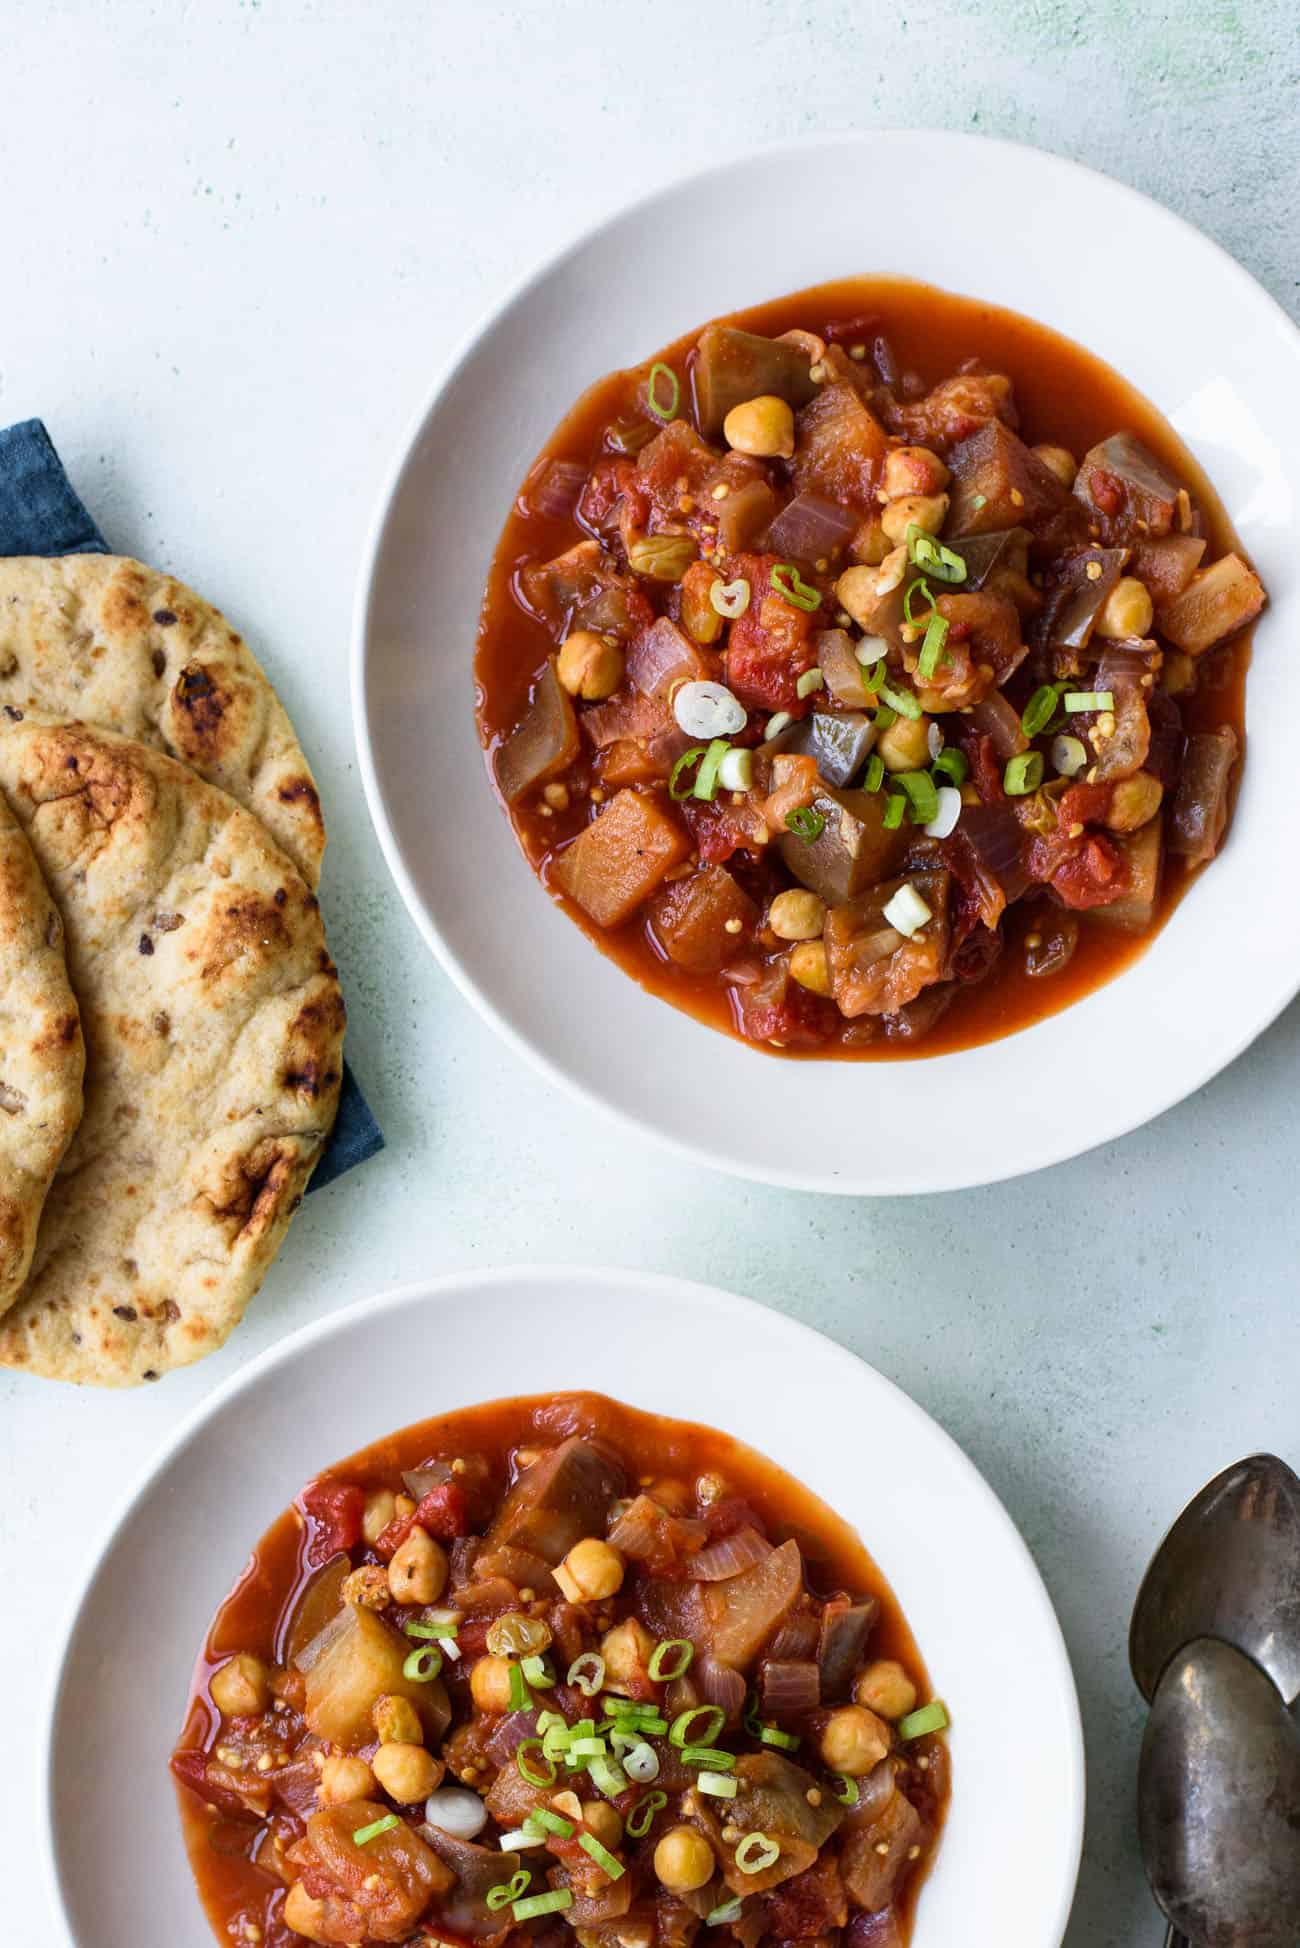 Two white bowls of eggplant chickpea stew next to a pile of flatbreads